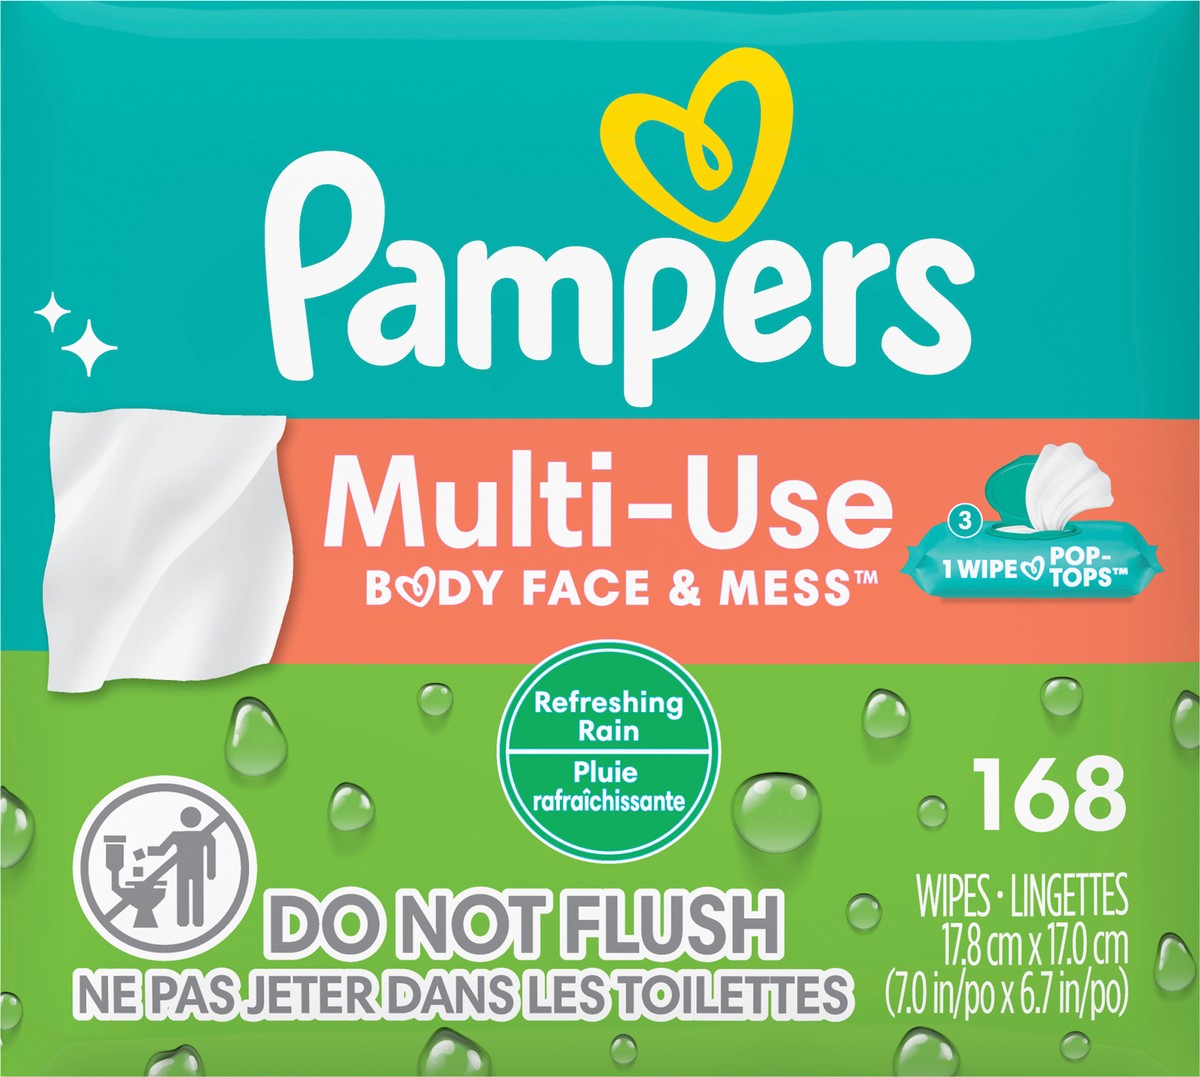 slide 4 of 4, Pampers Expressions Botanical Rain Baby Wipes 3x, 168 ct